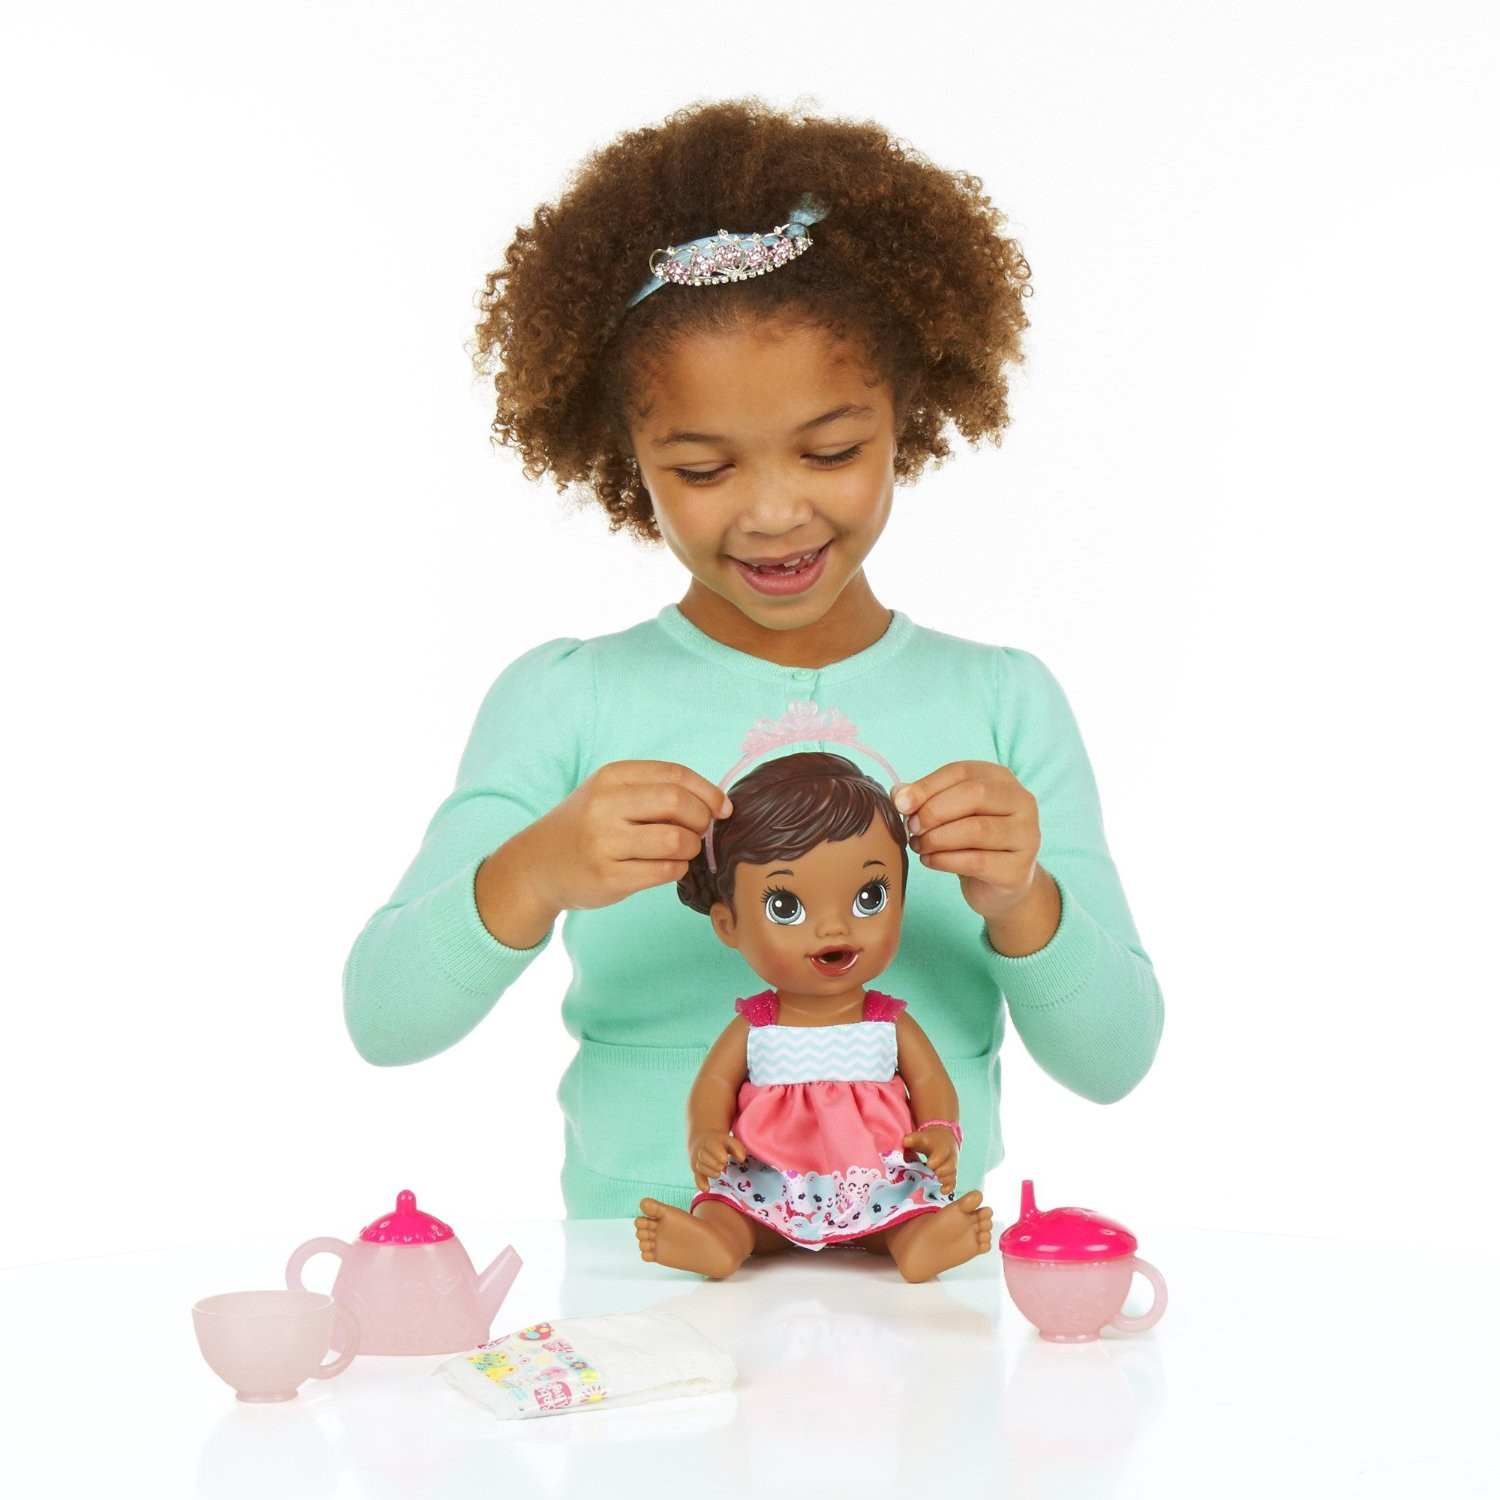 Baby Alive Tea Party Doll
 Baby Alive Lil’ Sips Baby Has a Tea Party Doll African